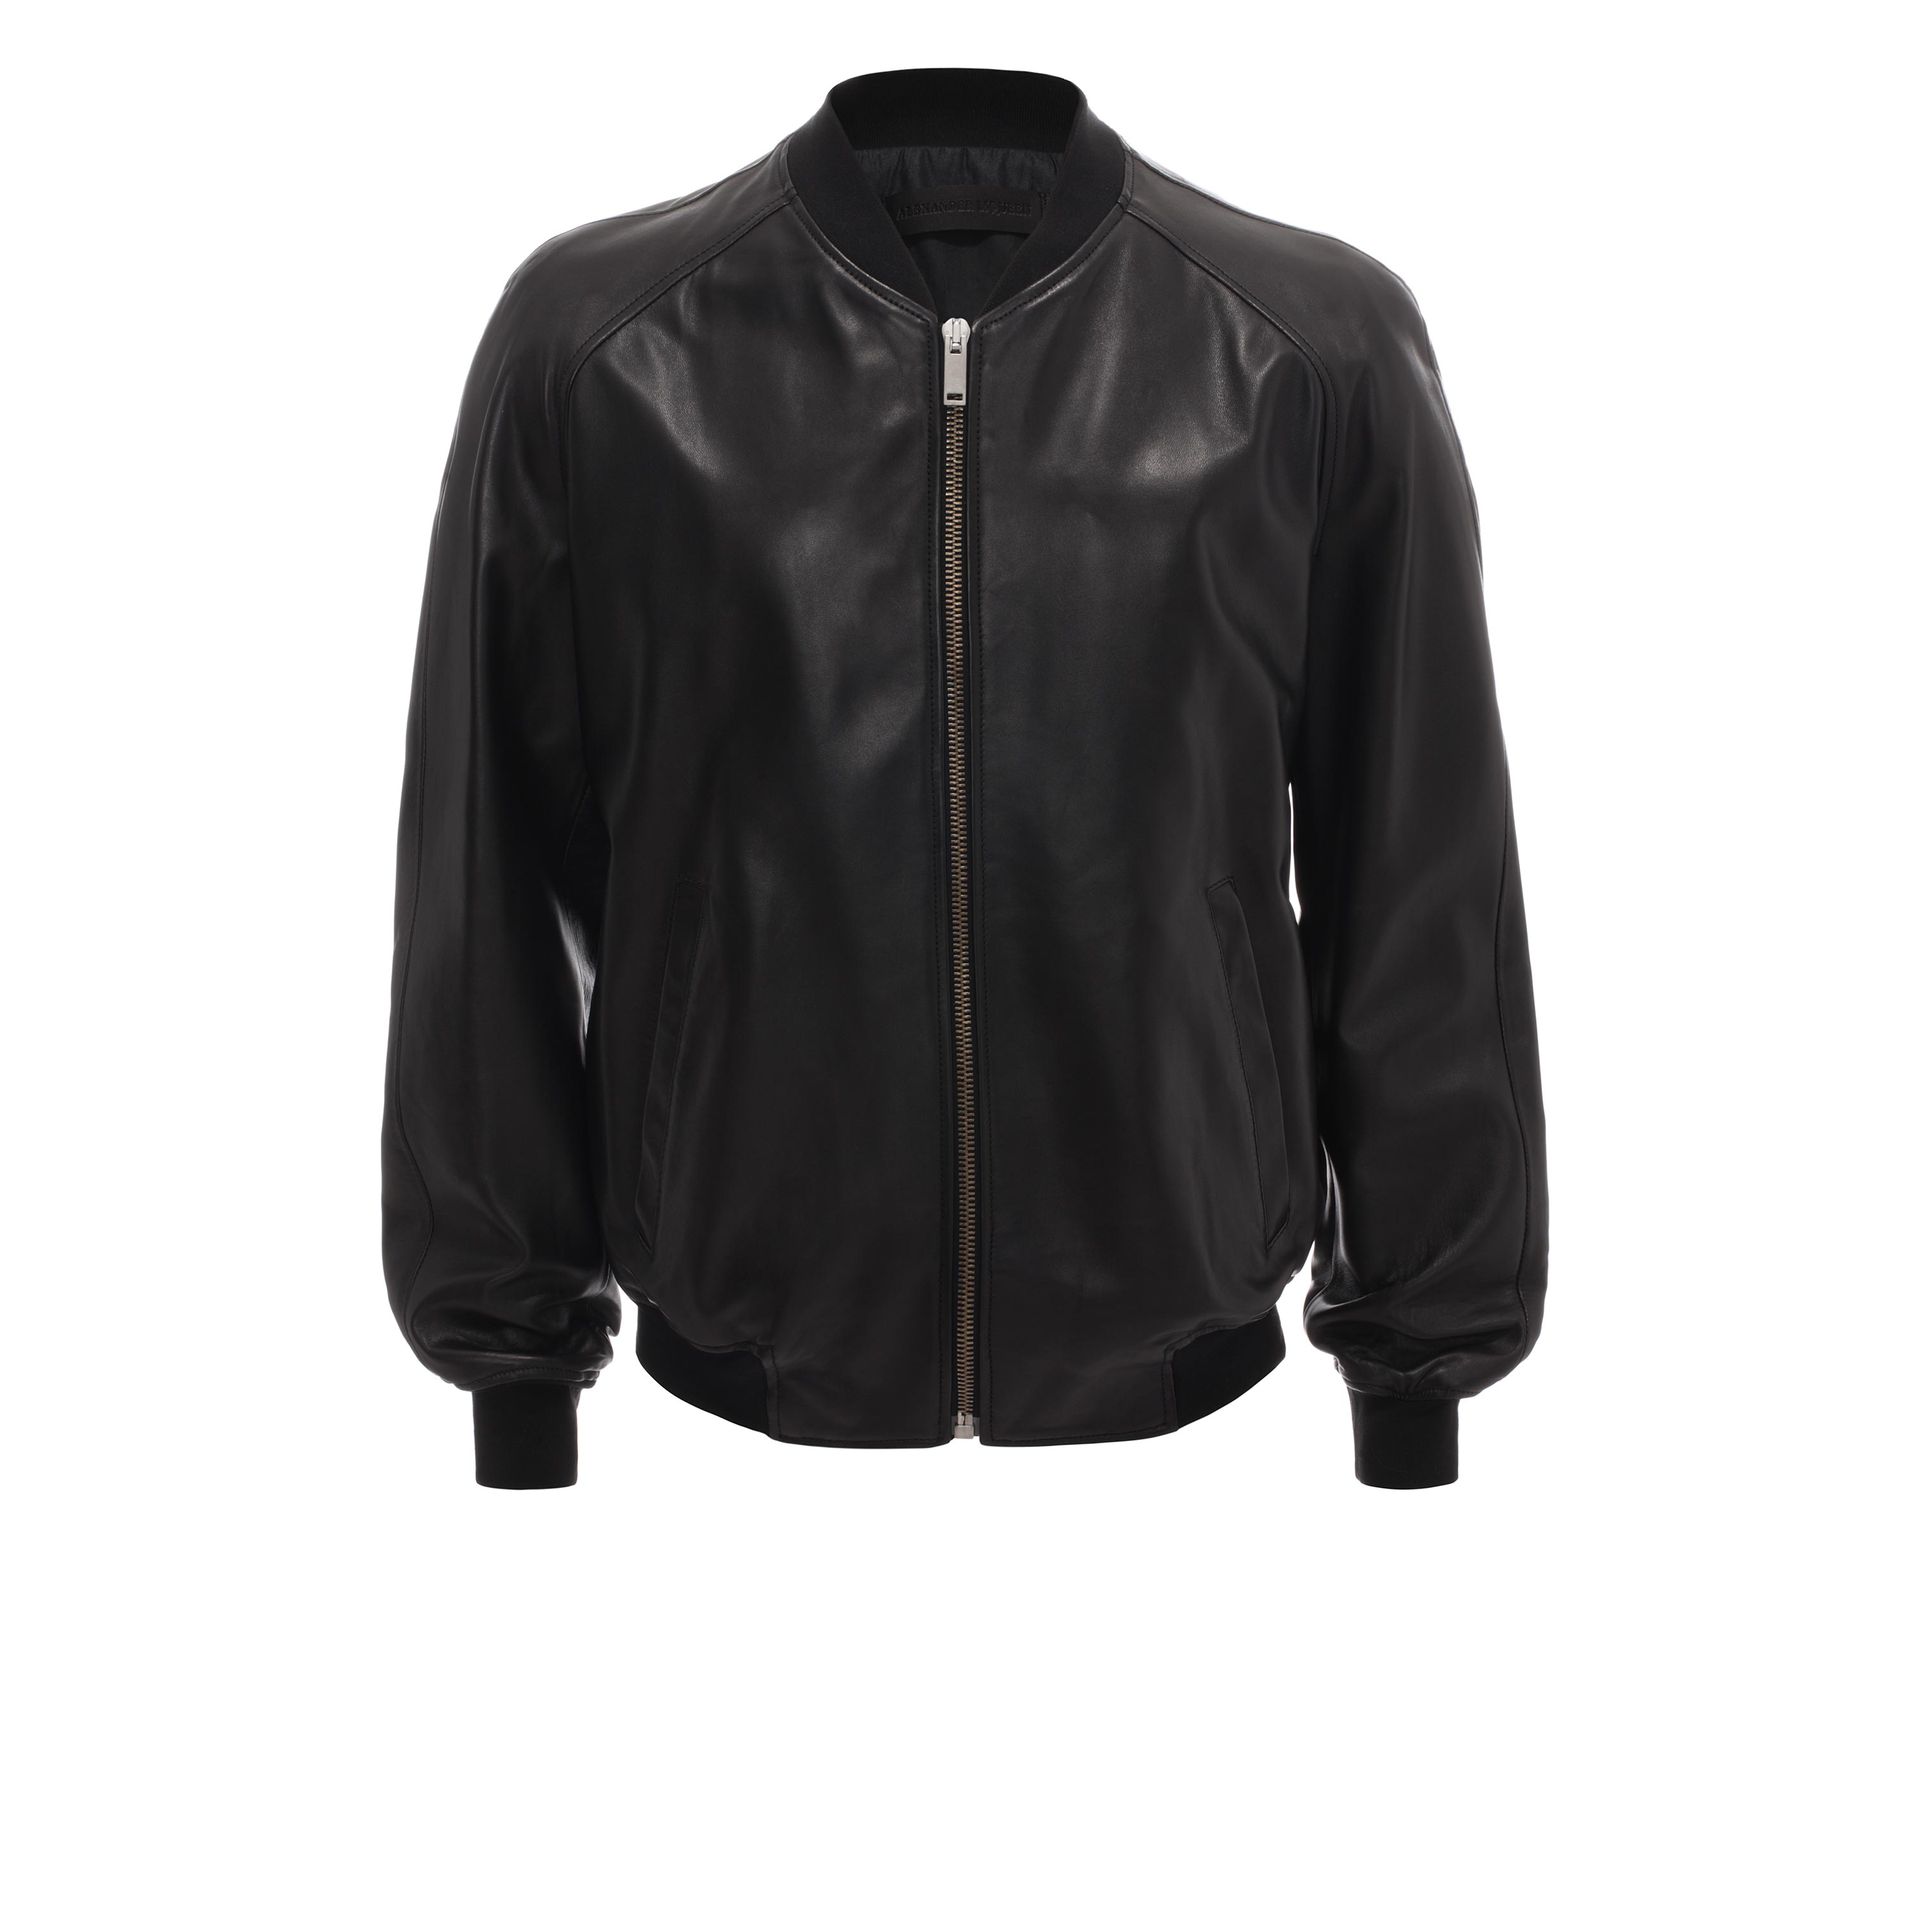 Perforated Skull Leather Bomber Jacket Alexander McQueen | Leather ...